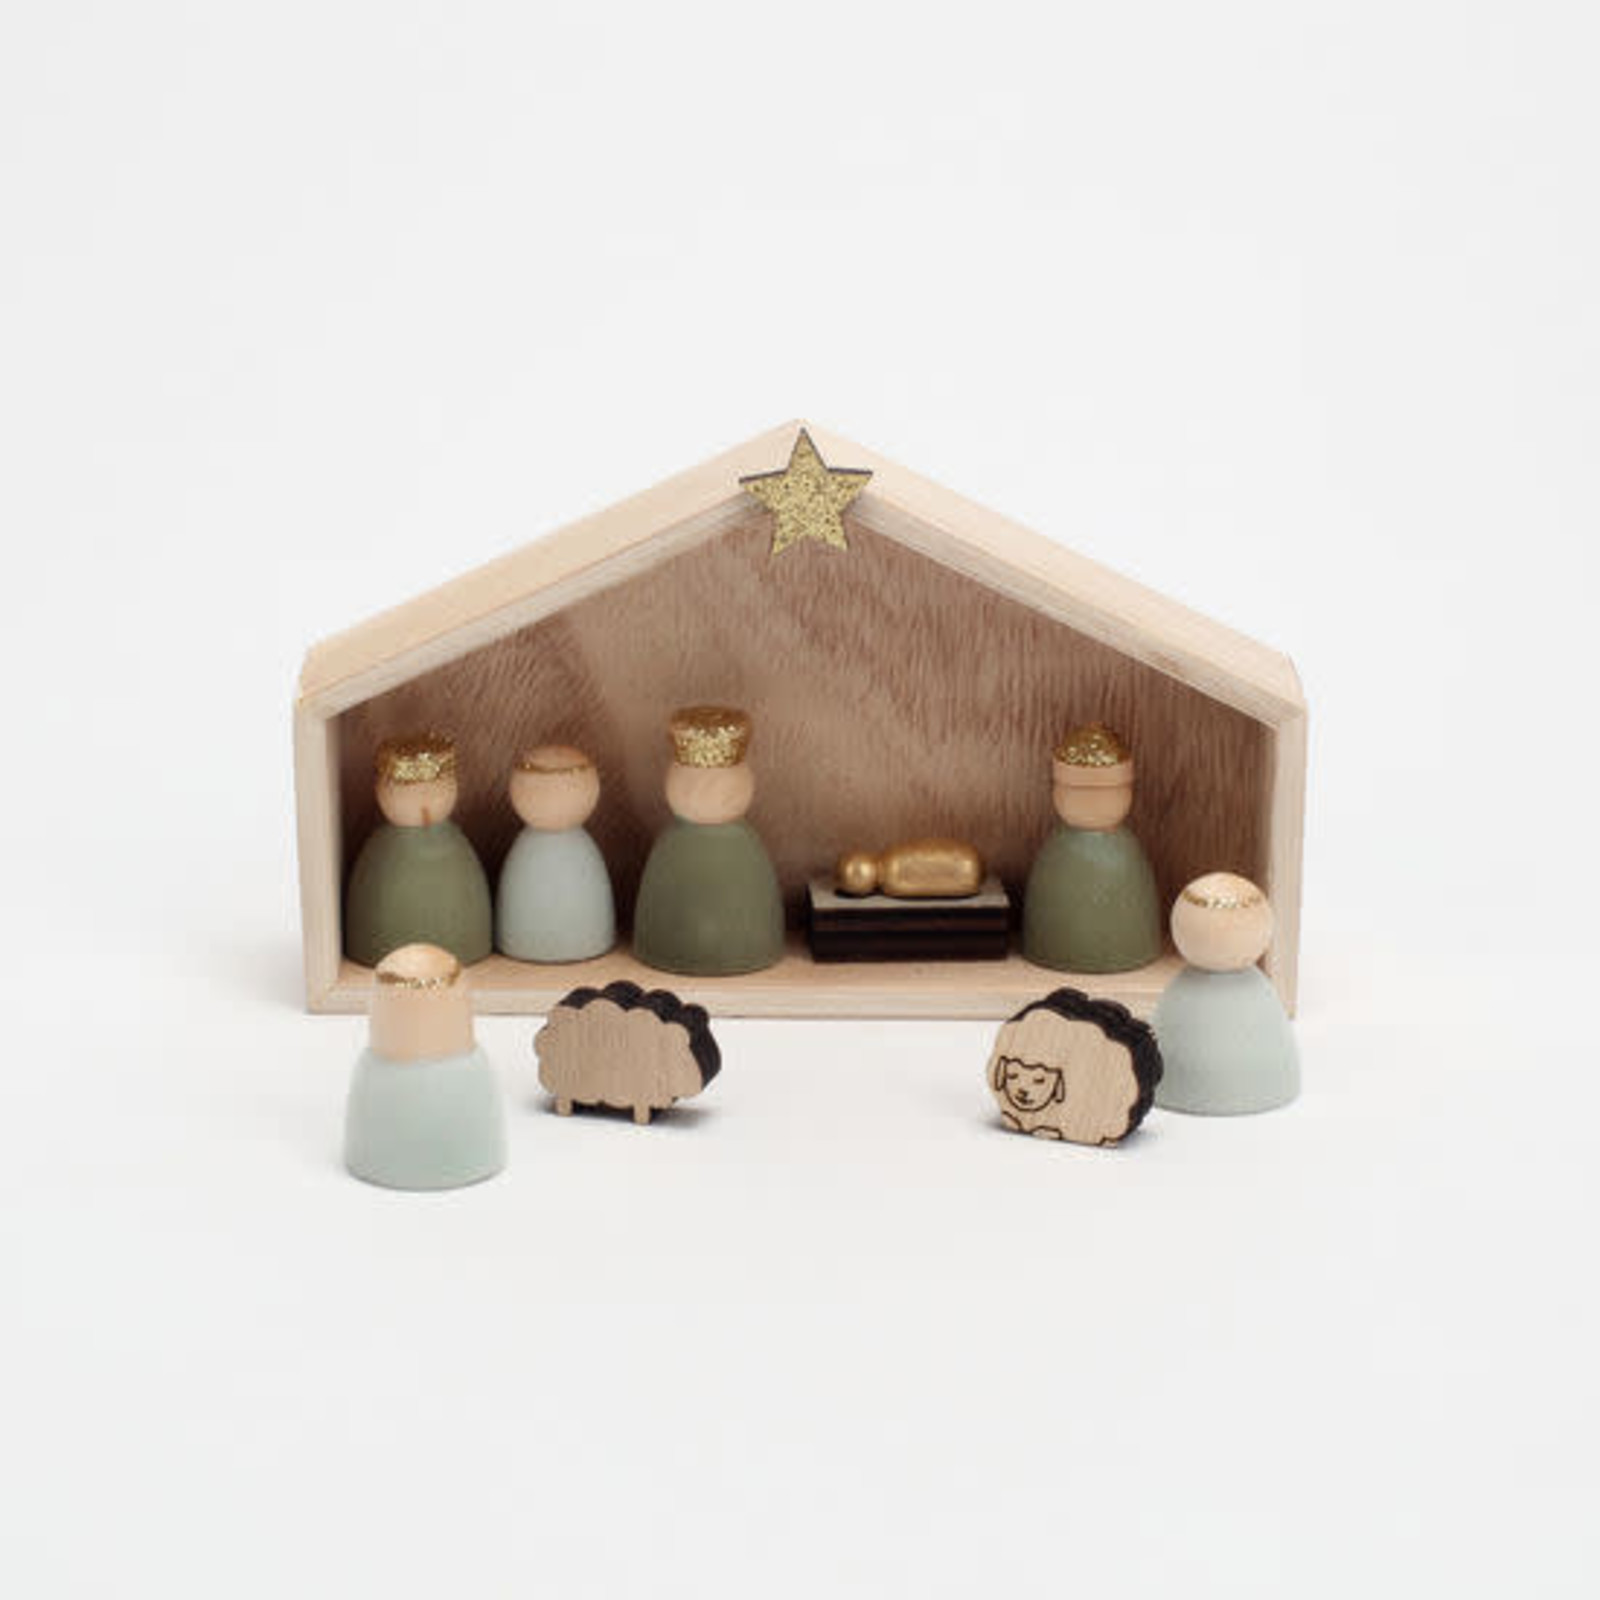 One Hundred 80 Degrees Flocked Nativity, St/9, Wood, Figures:1.25", Creche 5.75" x 3.25 RS0139 loading=